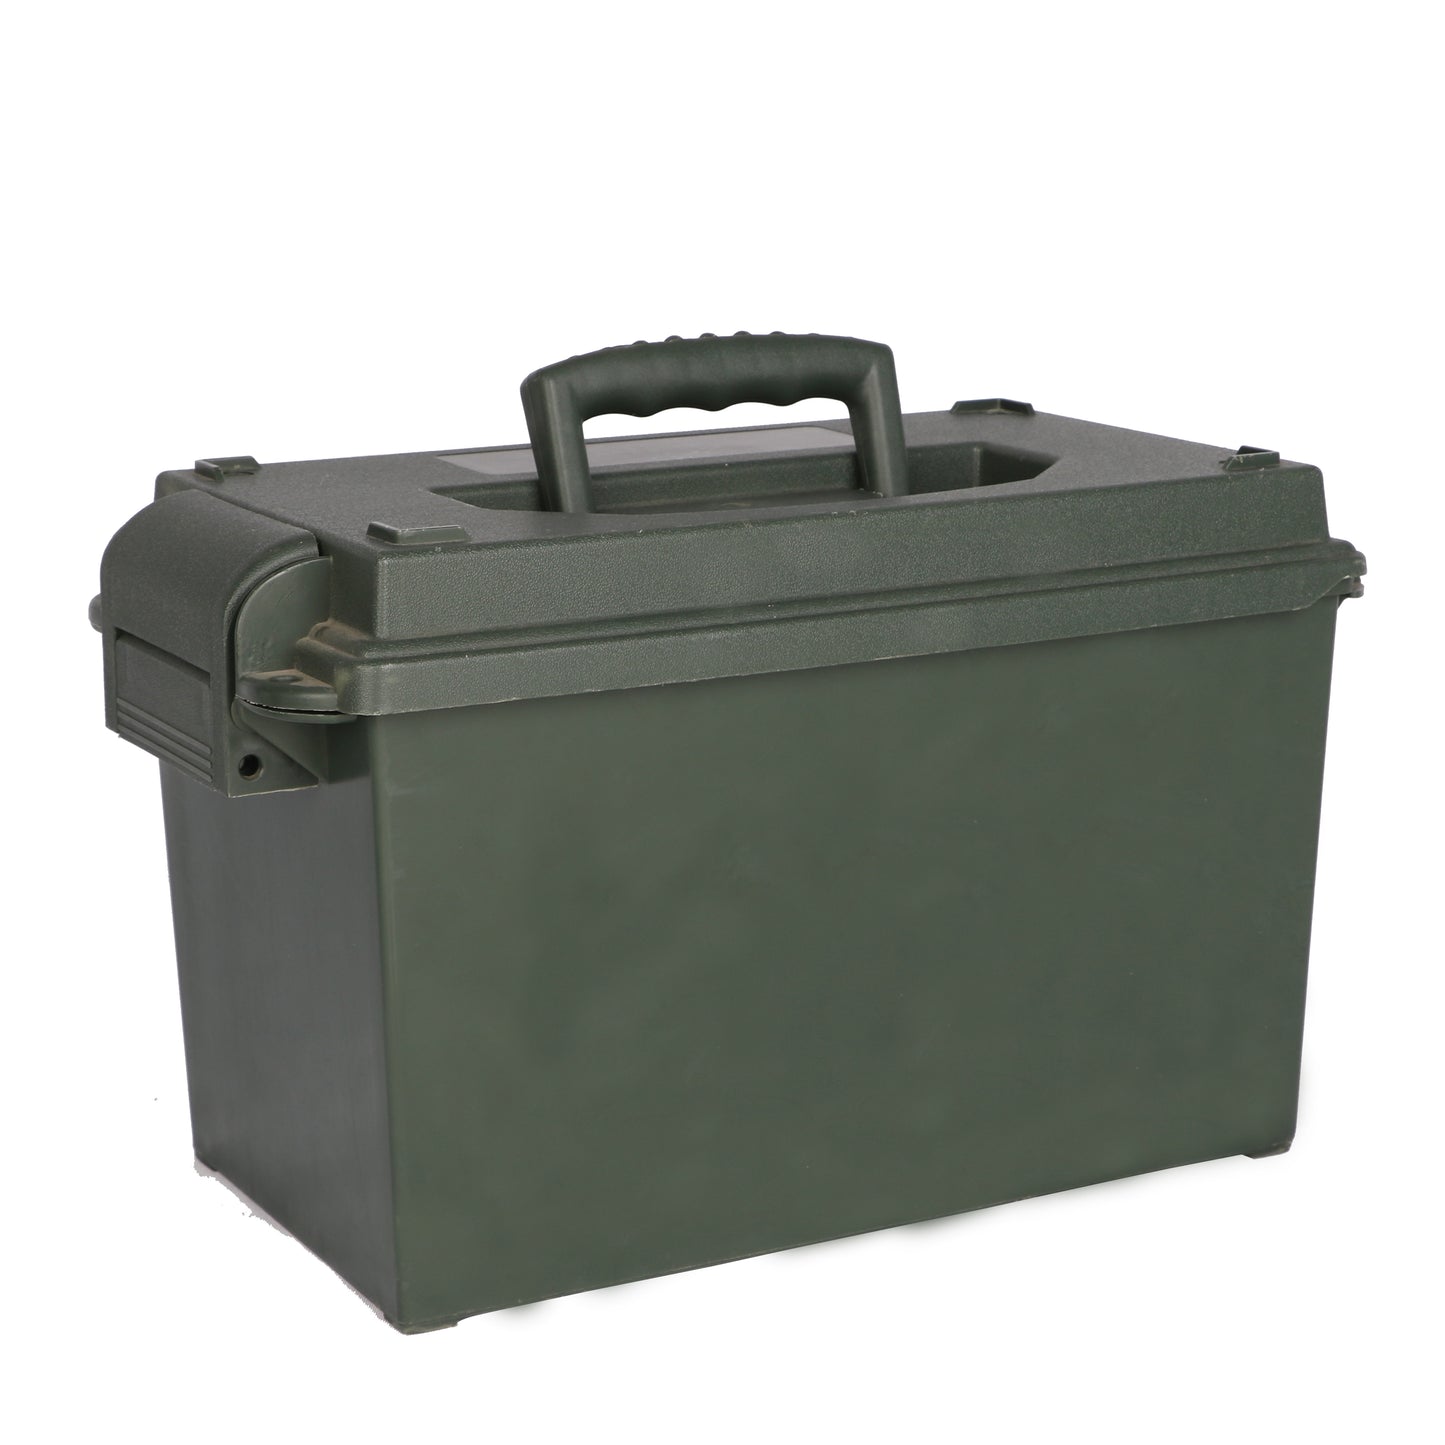 Lockable Lightweight Carry Ammo Can